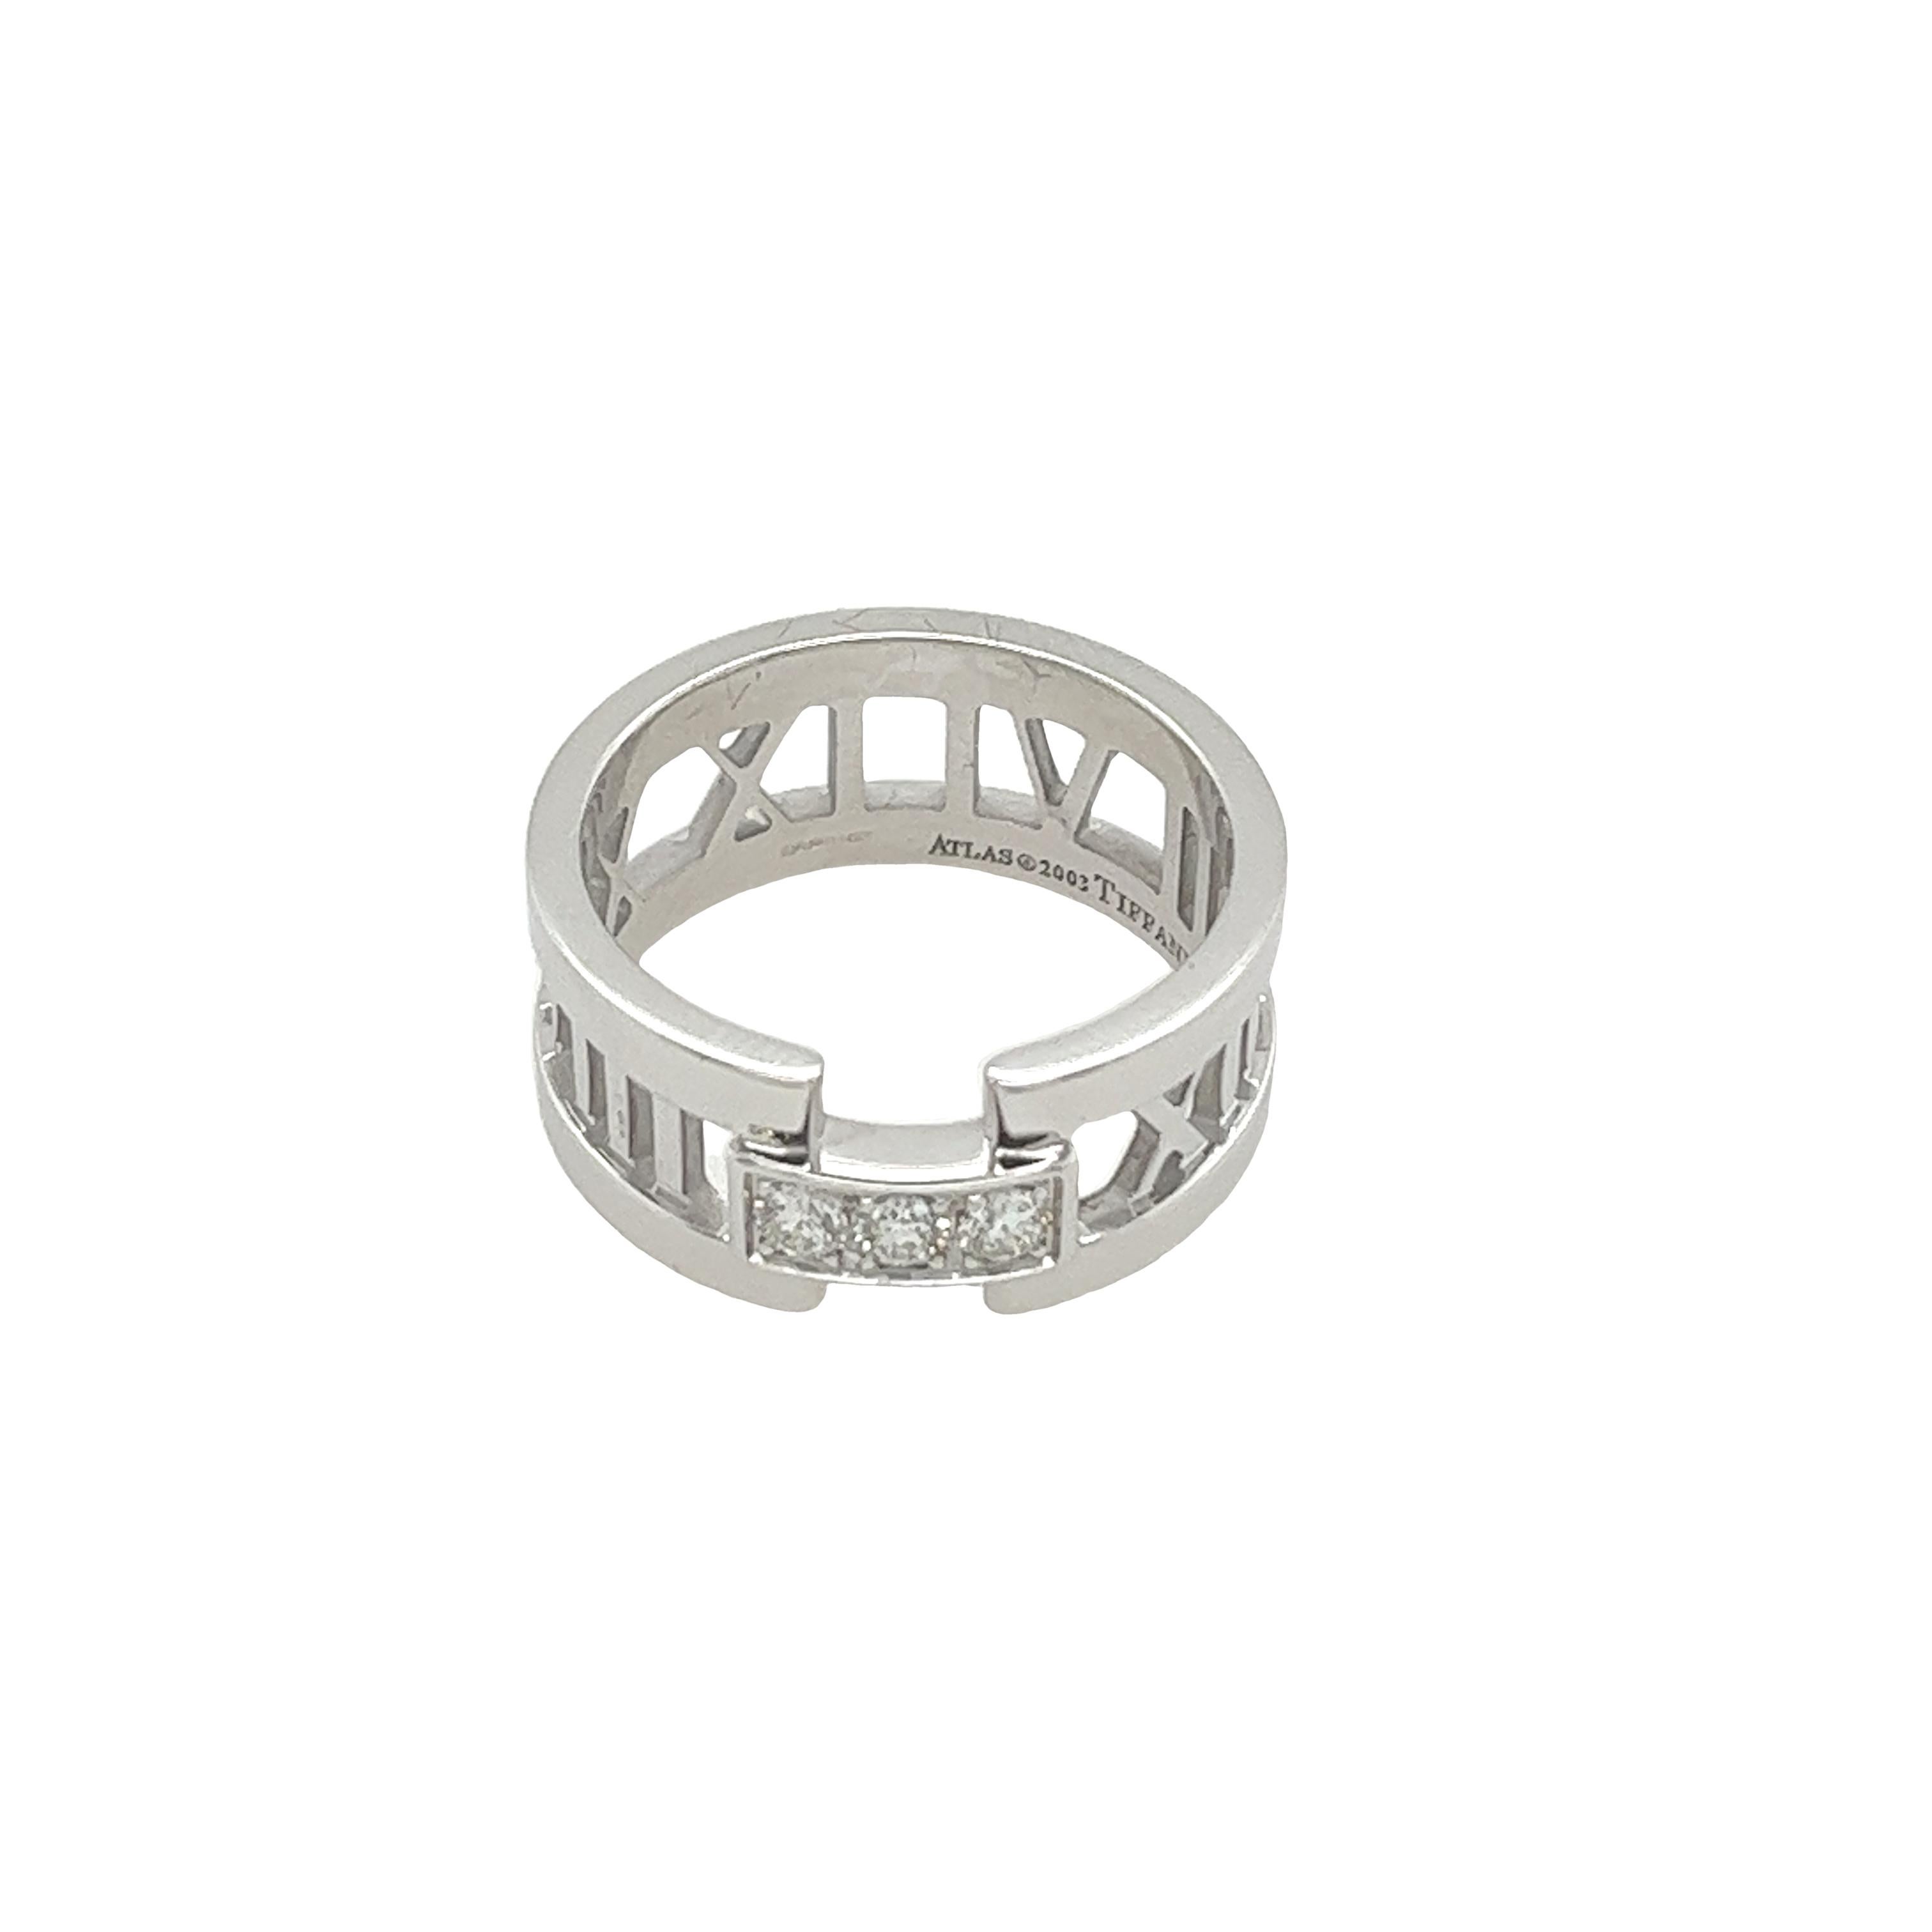 Elevate your style with this exquisite Tiffany & Co Atlas Band in 18ct White Gold.
This stunning ring features a modern design with interlocking gold bands that glimmer in any light. 
A trio of diamonds is elegantly set at the center, offering a